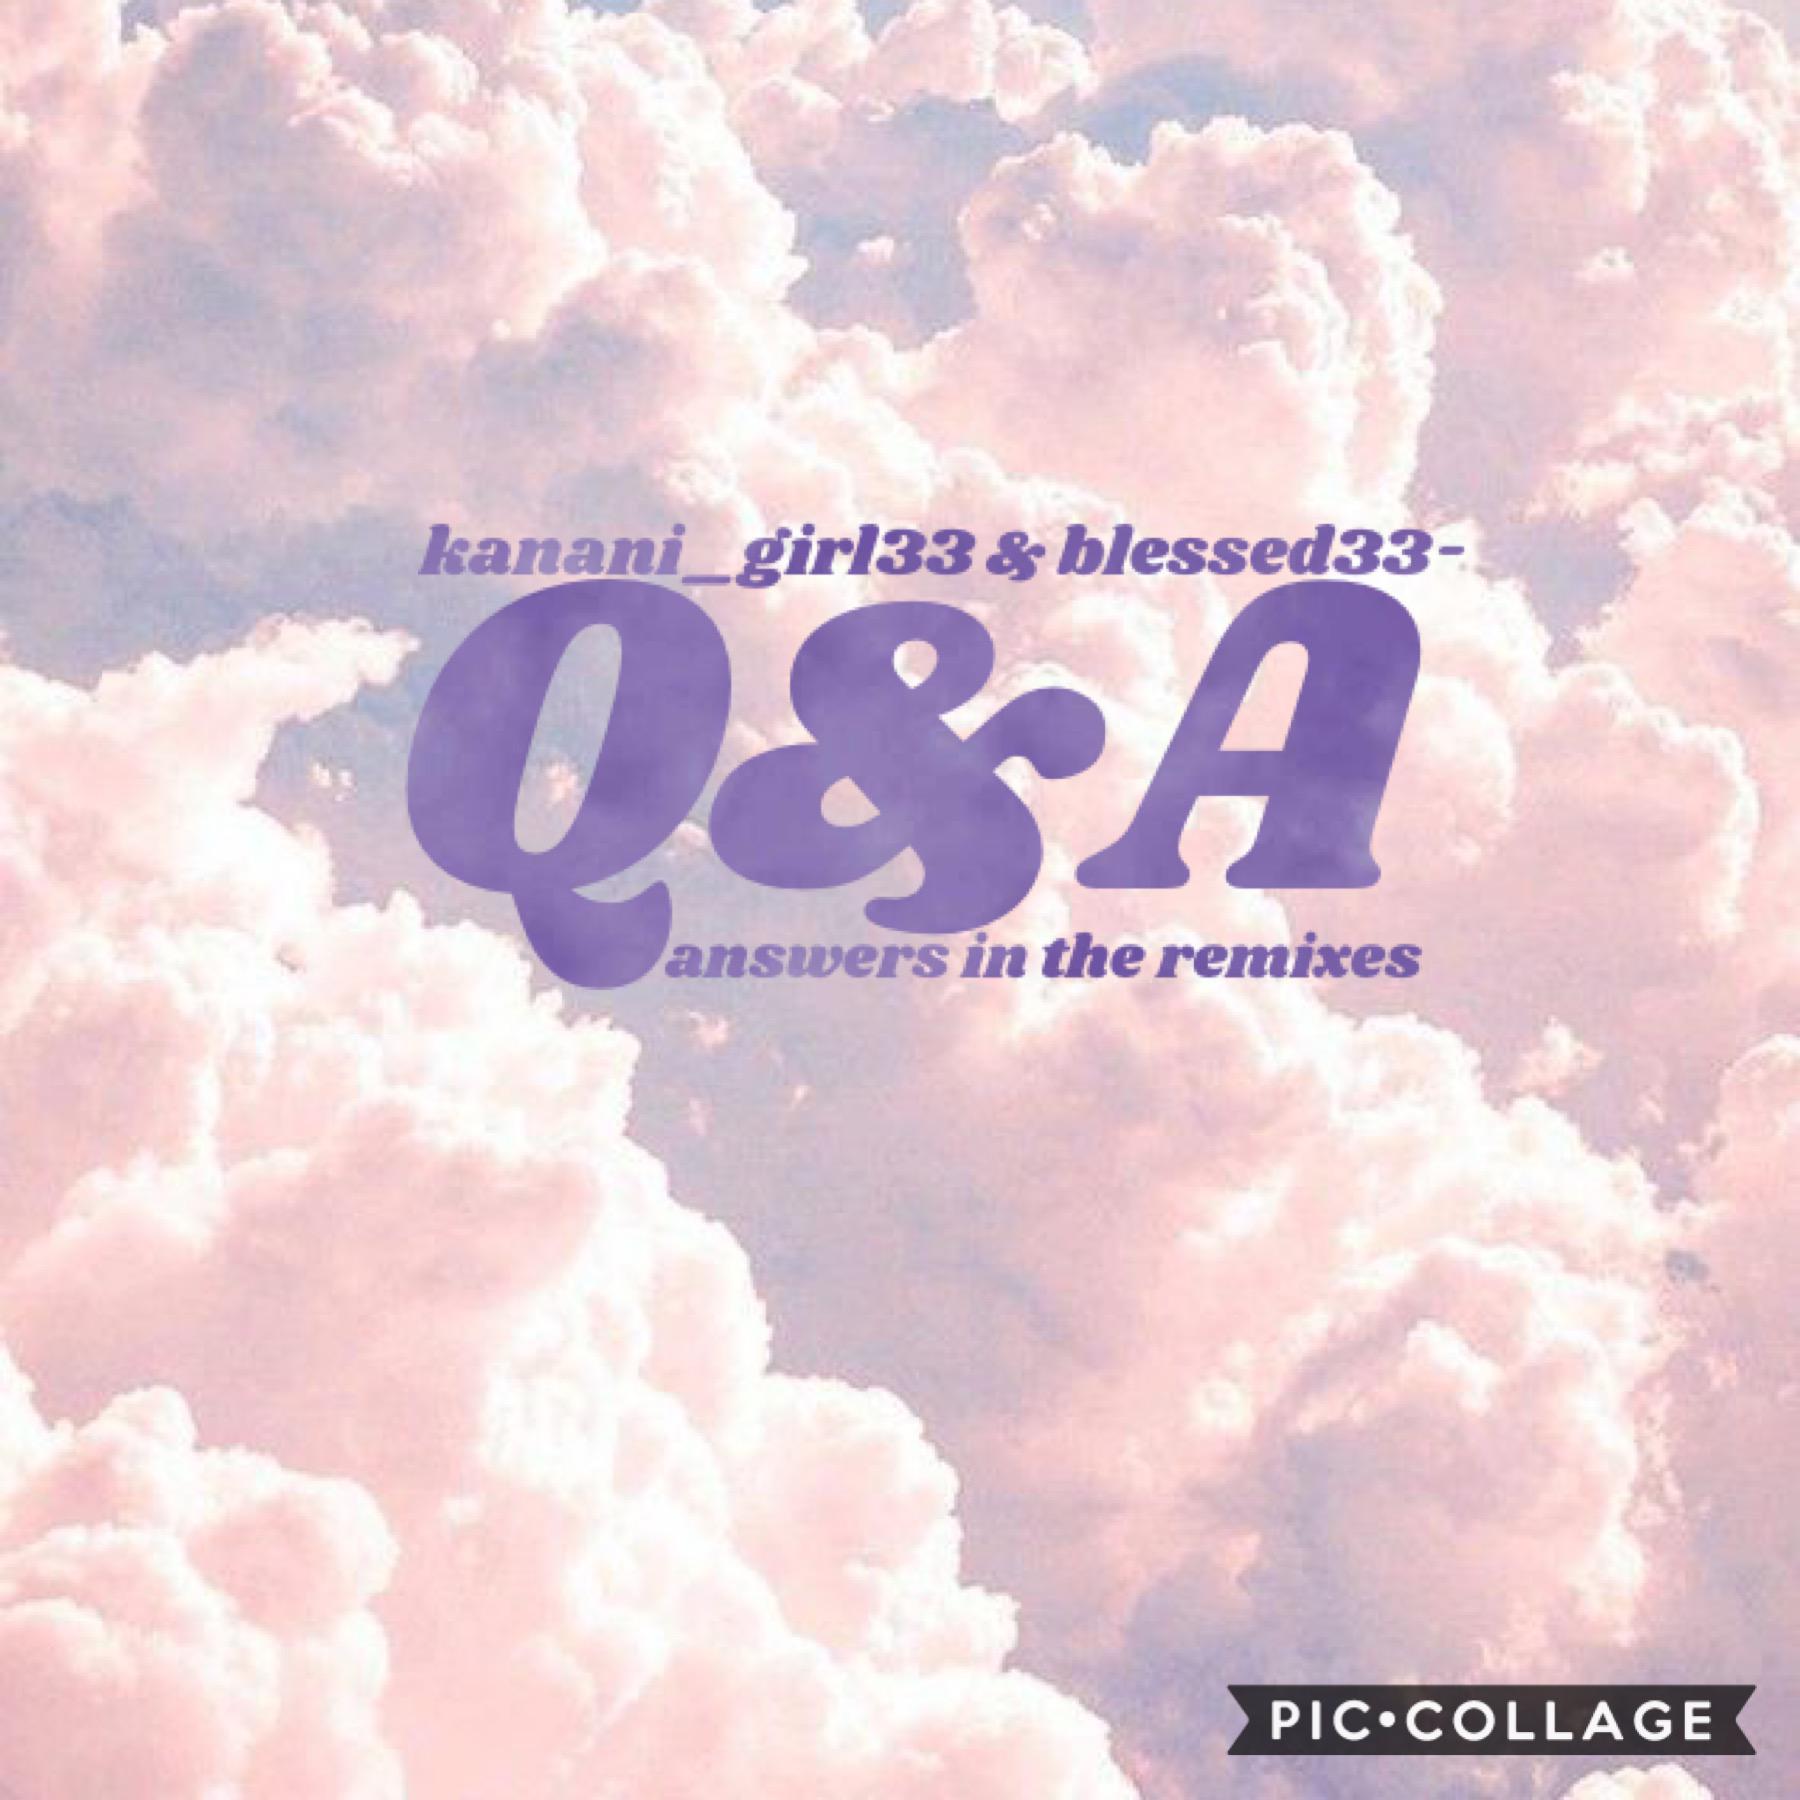 💞tap💞
November 25, 2020
the q&a is here!! thank you to everyone who asked questions on my main!! If you guys like this, i might do another one soon!! Check the remixes for all of the answers! And dont forget to check out my main kanani_girl33!! ❤️